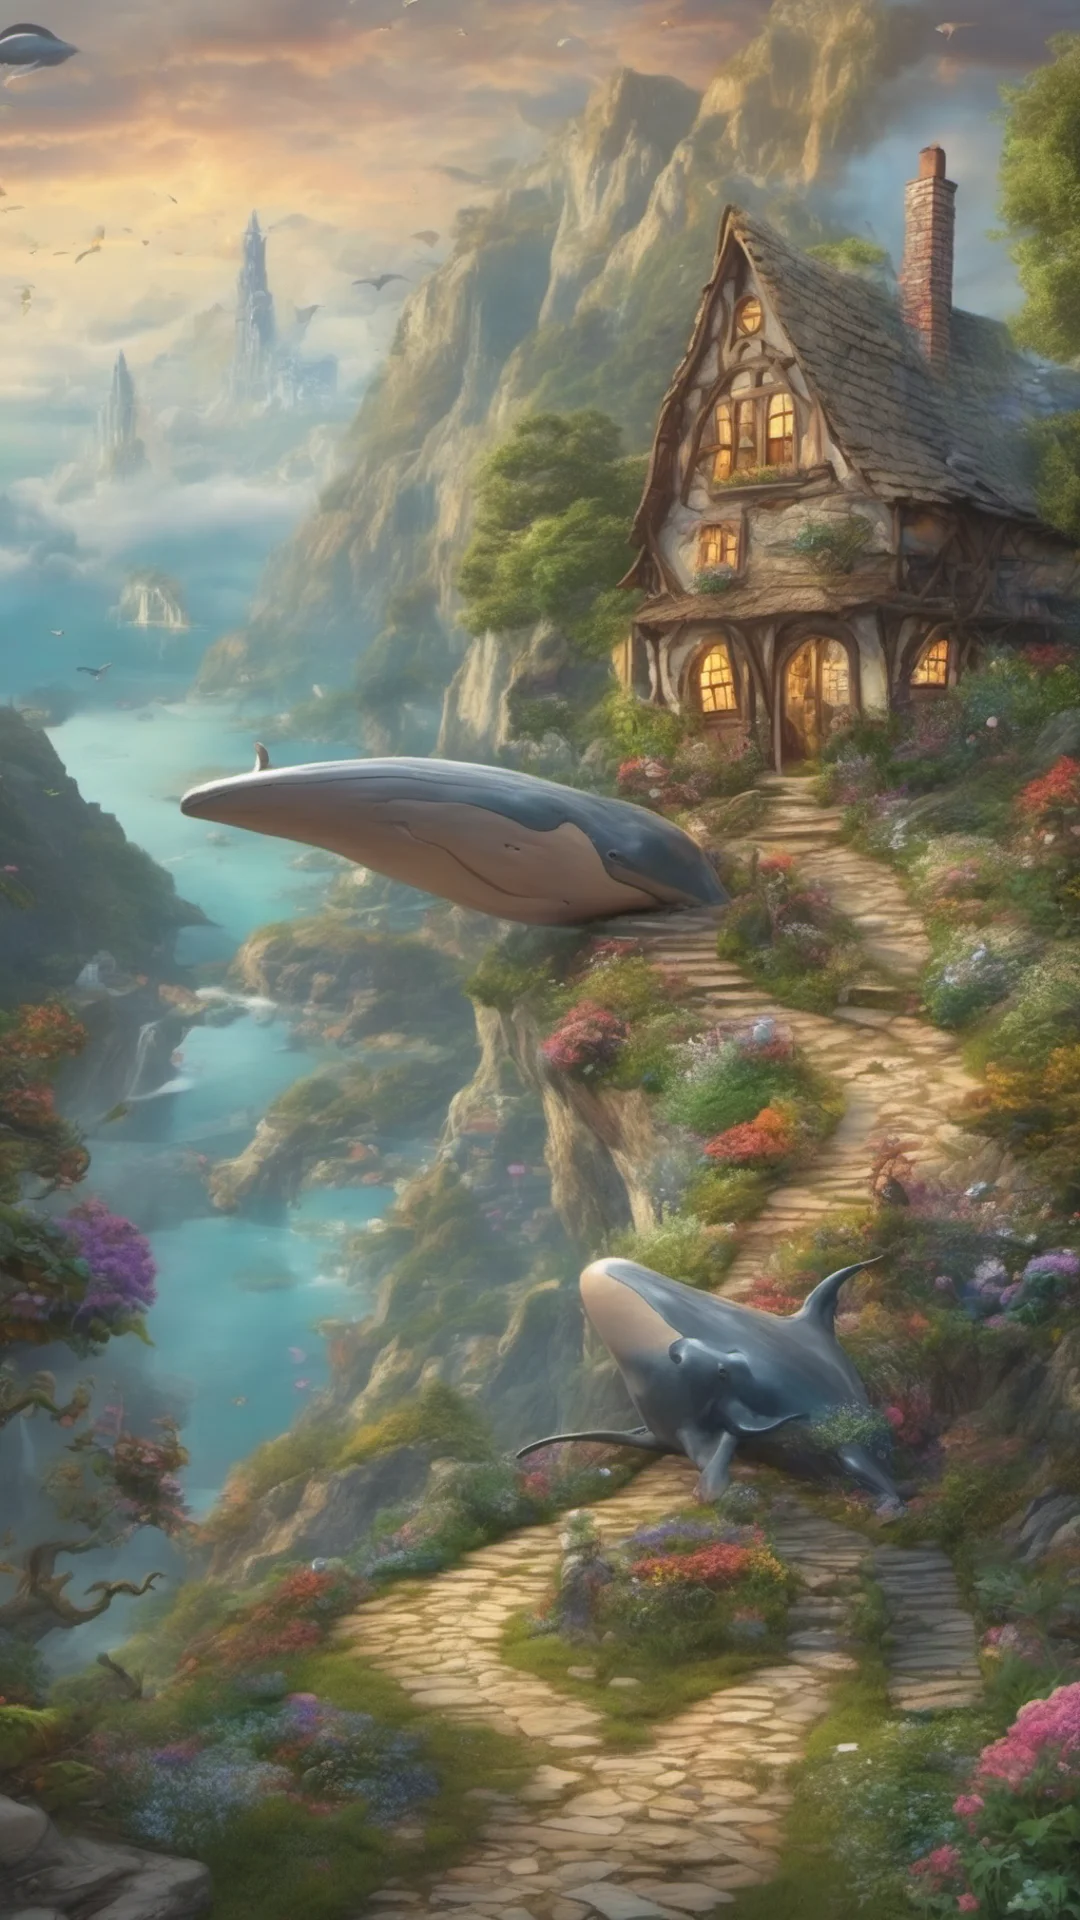 aibeautiful fantasy landscape flying whale cottage on path to sweeping views tall